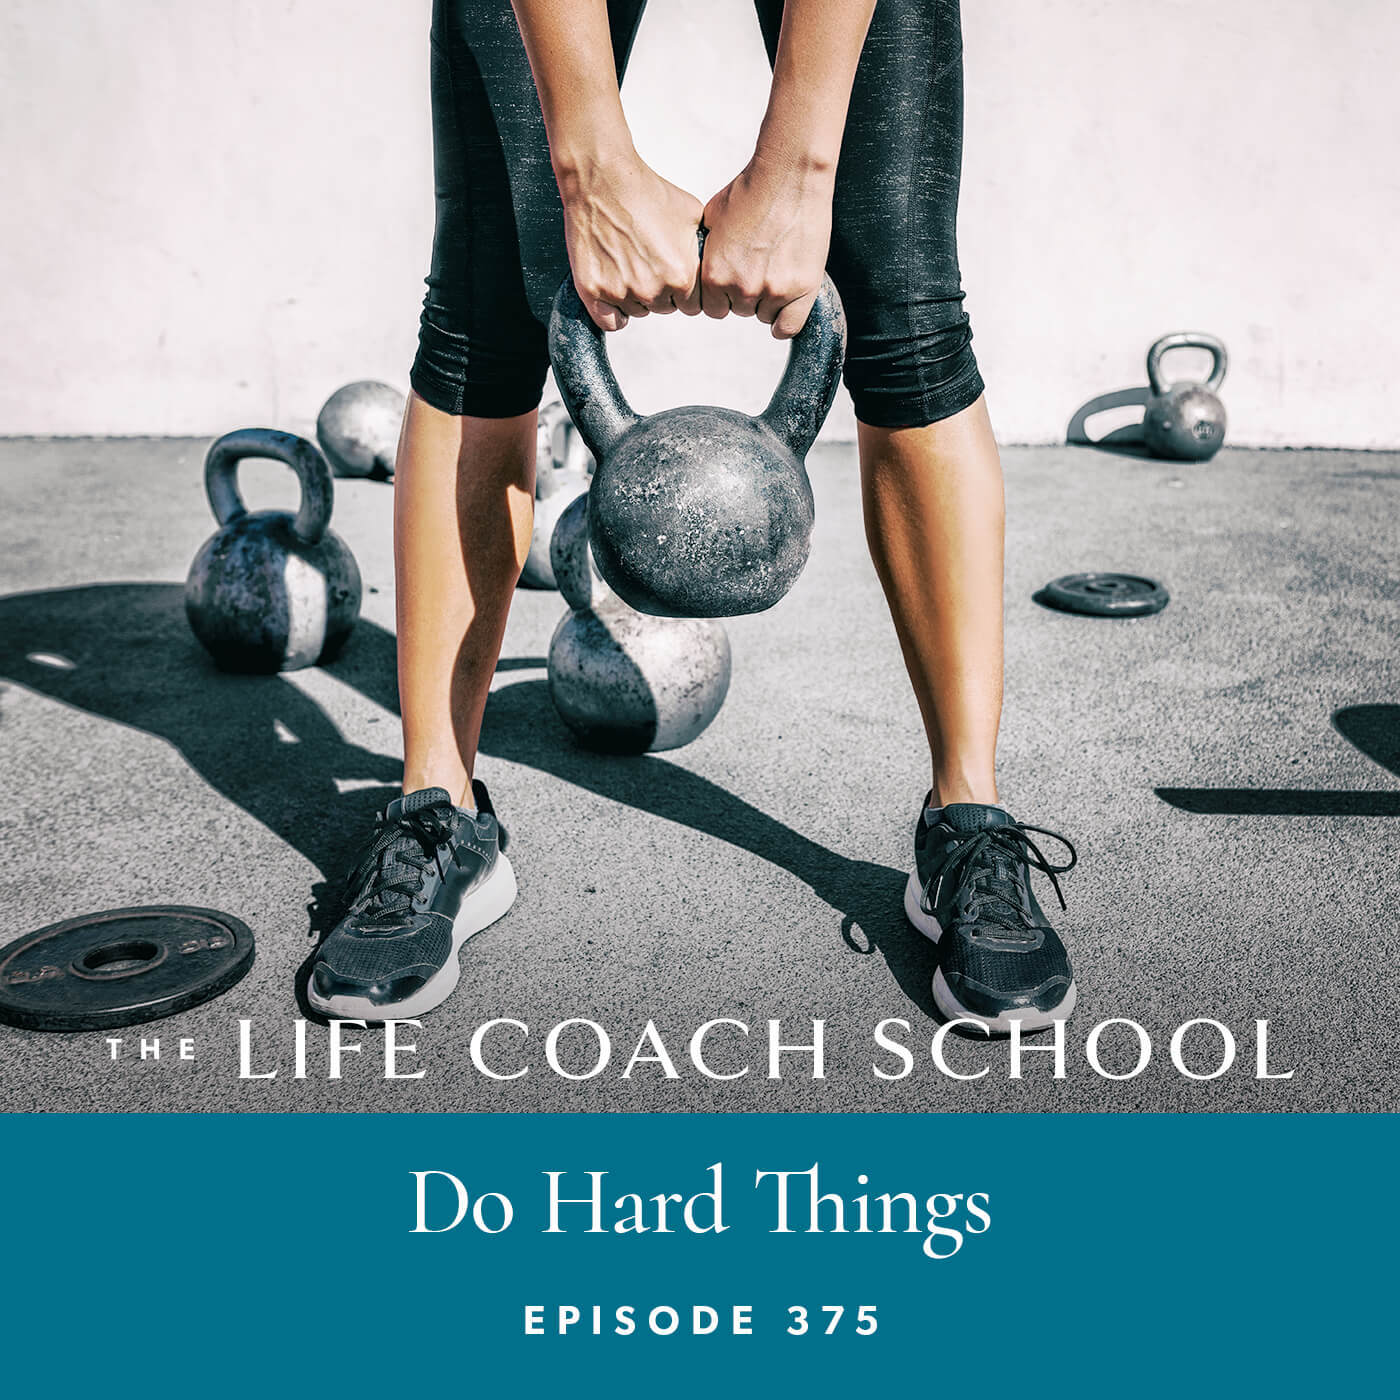 The Life Coach School Podcast with Brooke Castillo | Do Hard Things